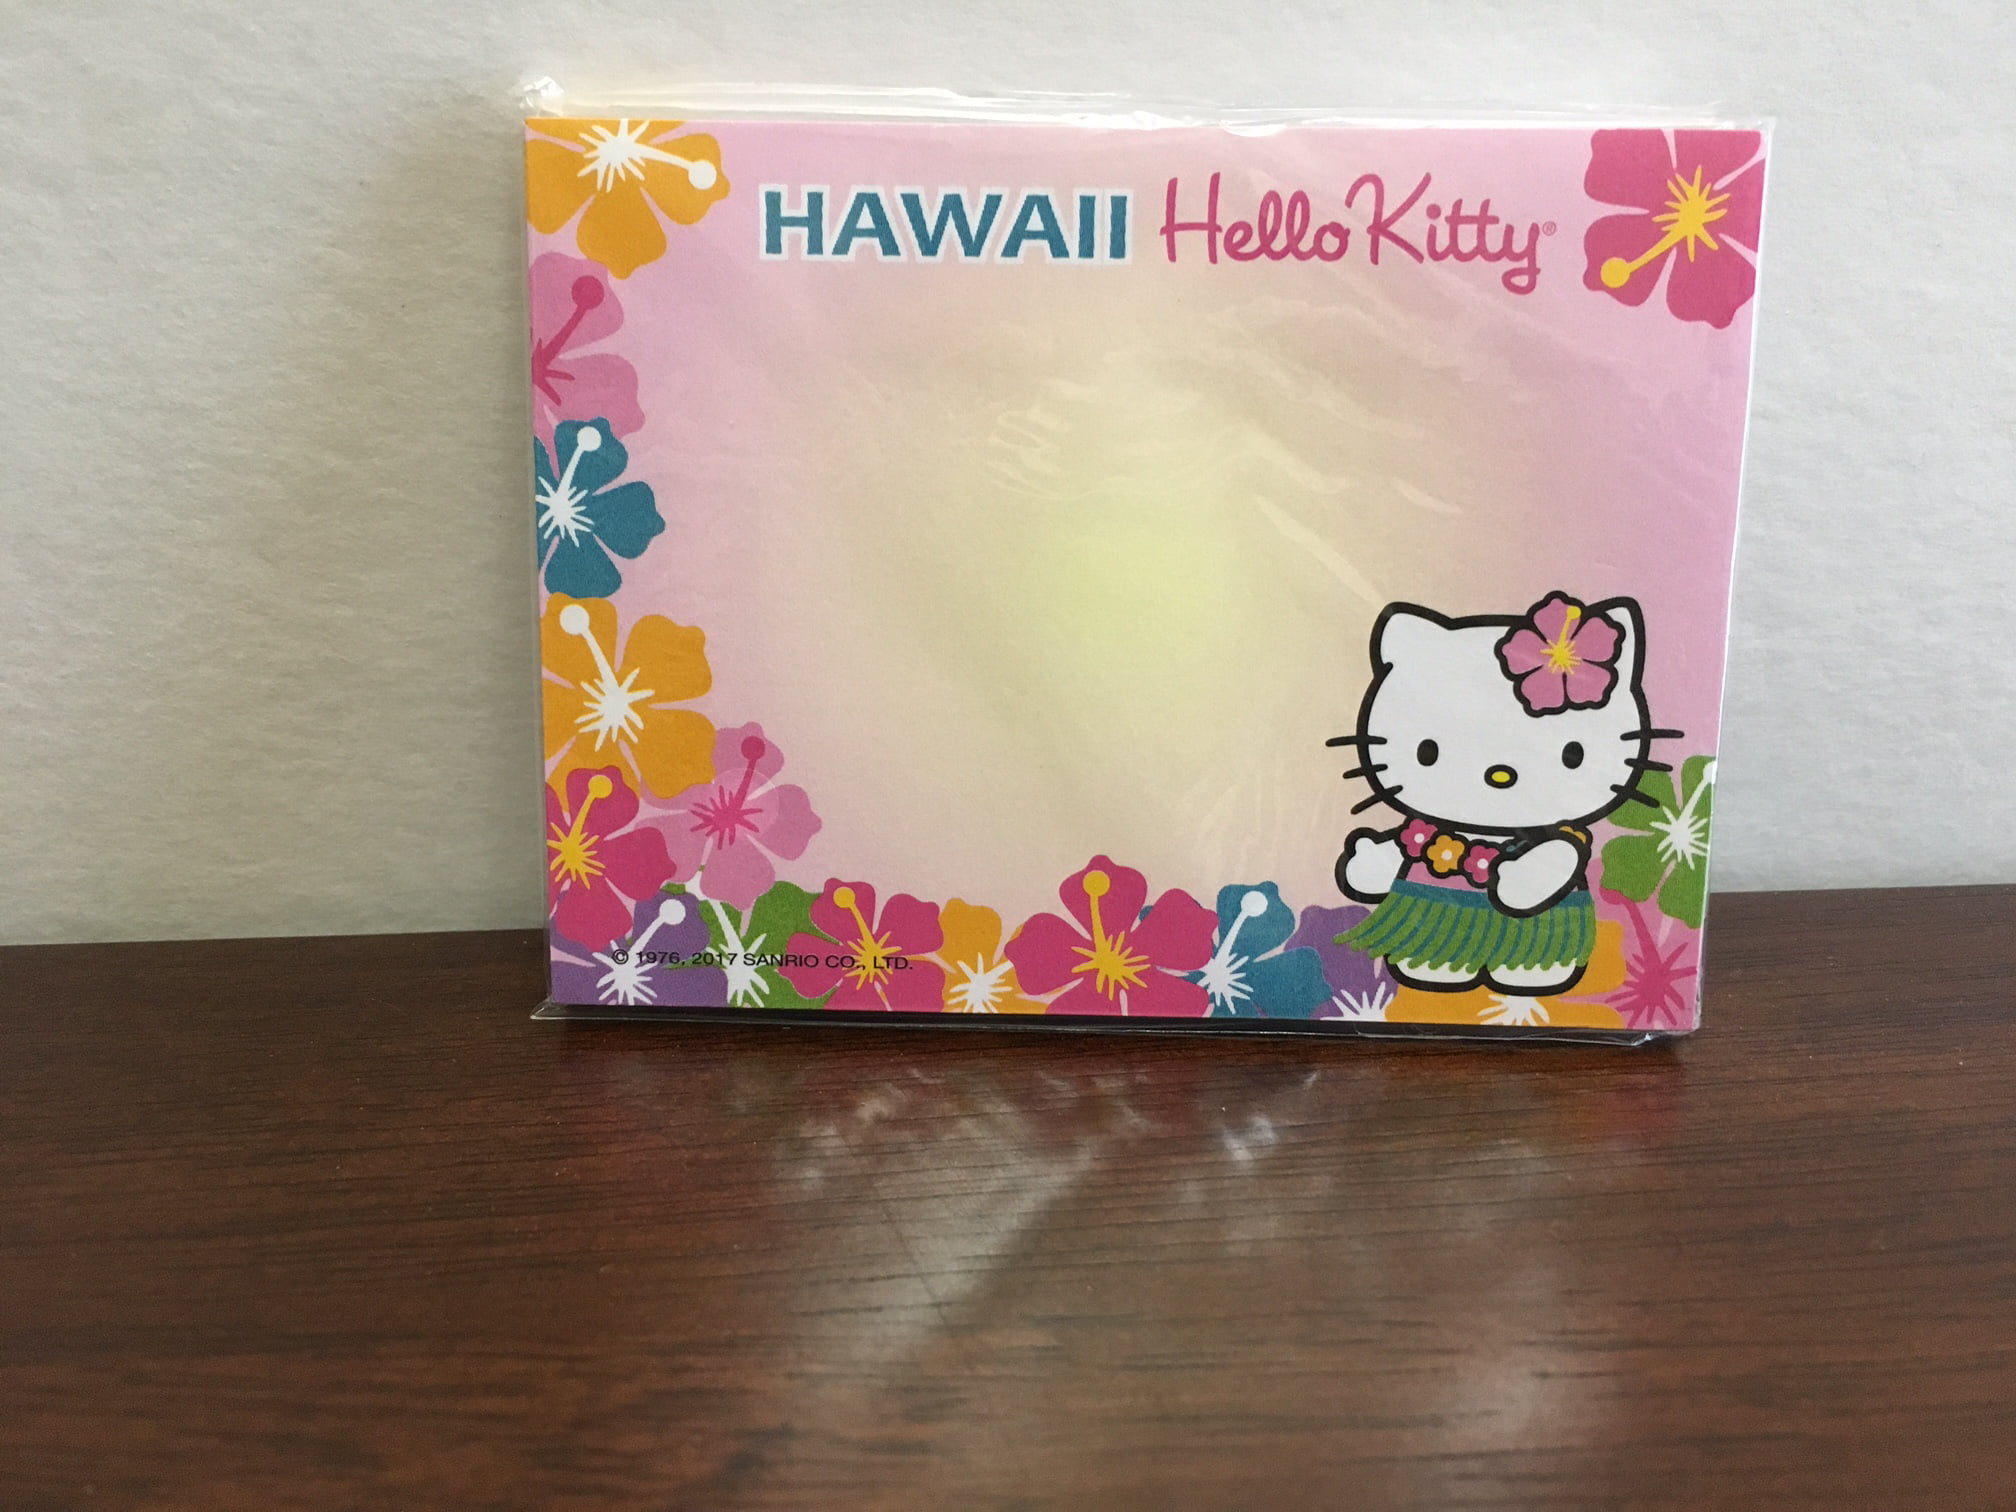 Sanrio Hello Kitty Sticky Notes Hawaii 30 Sheets Pink Flower Hula